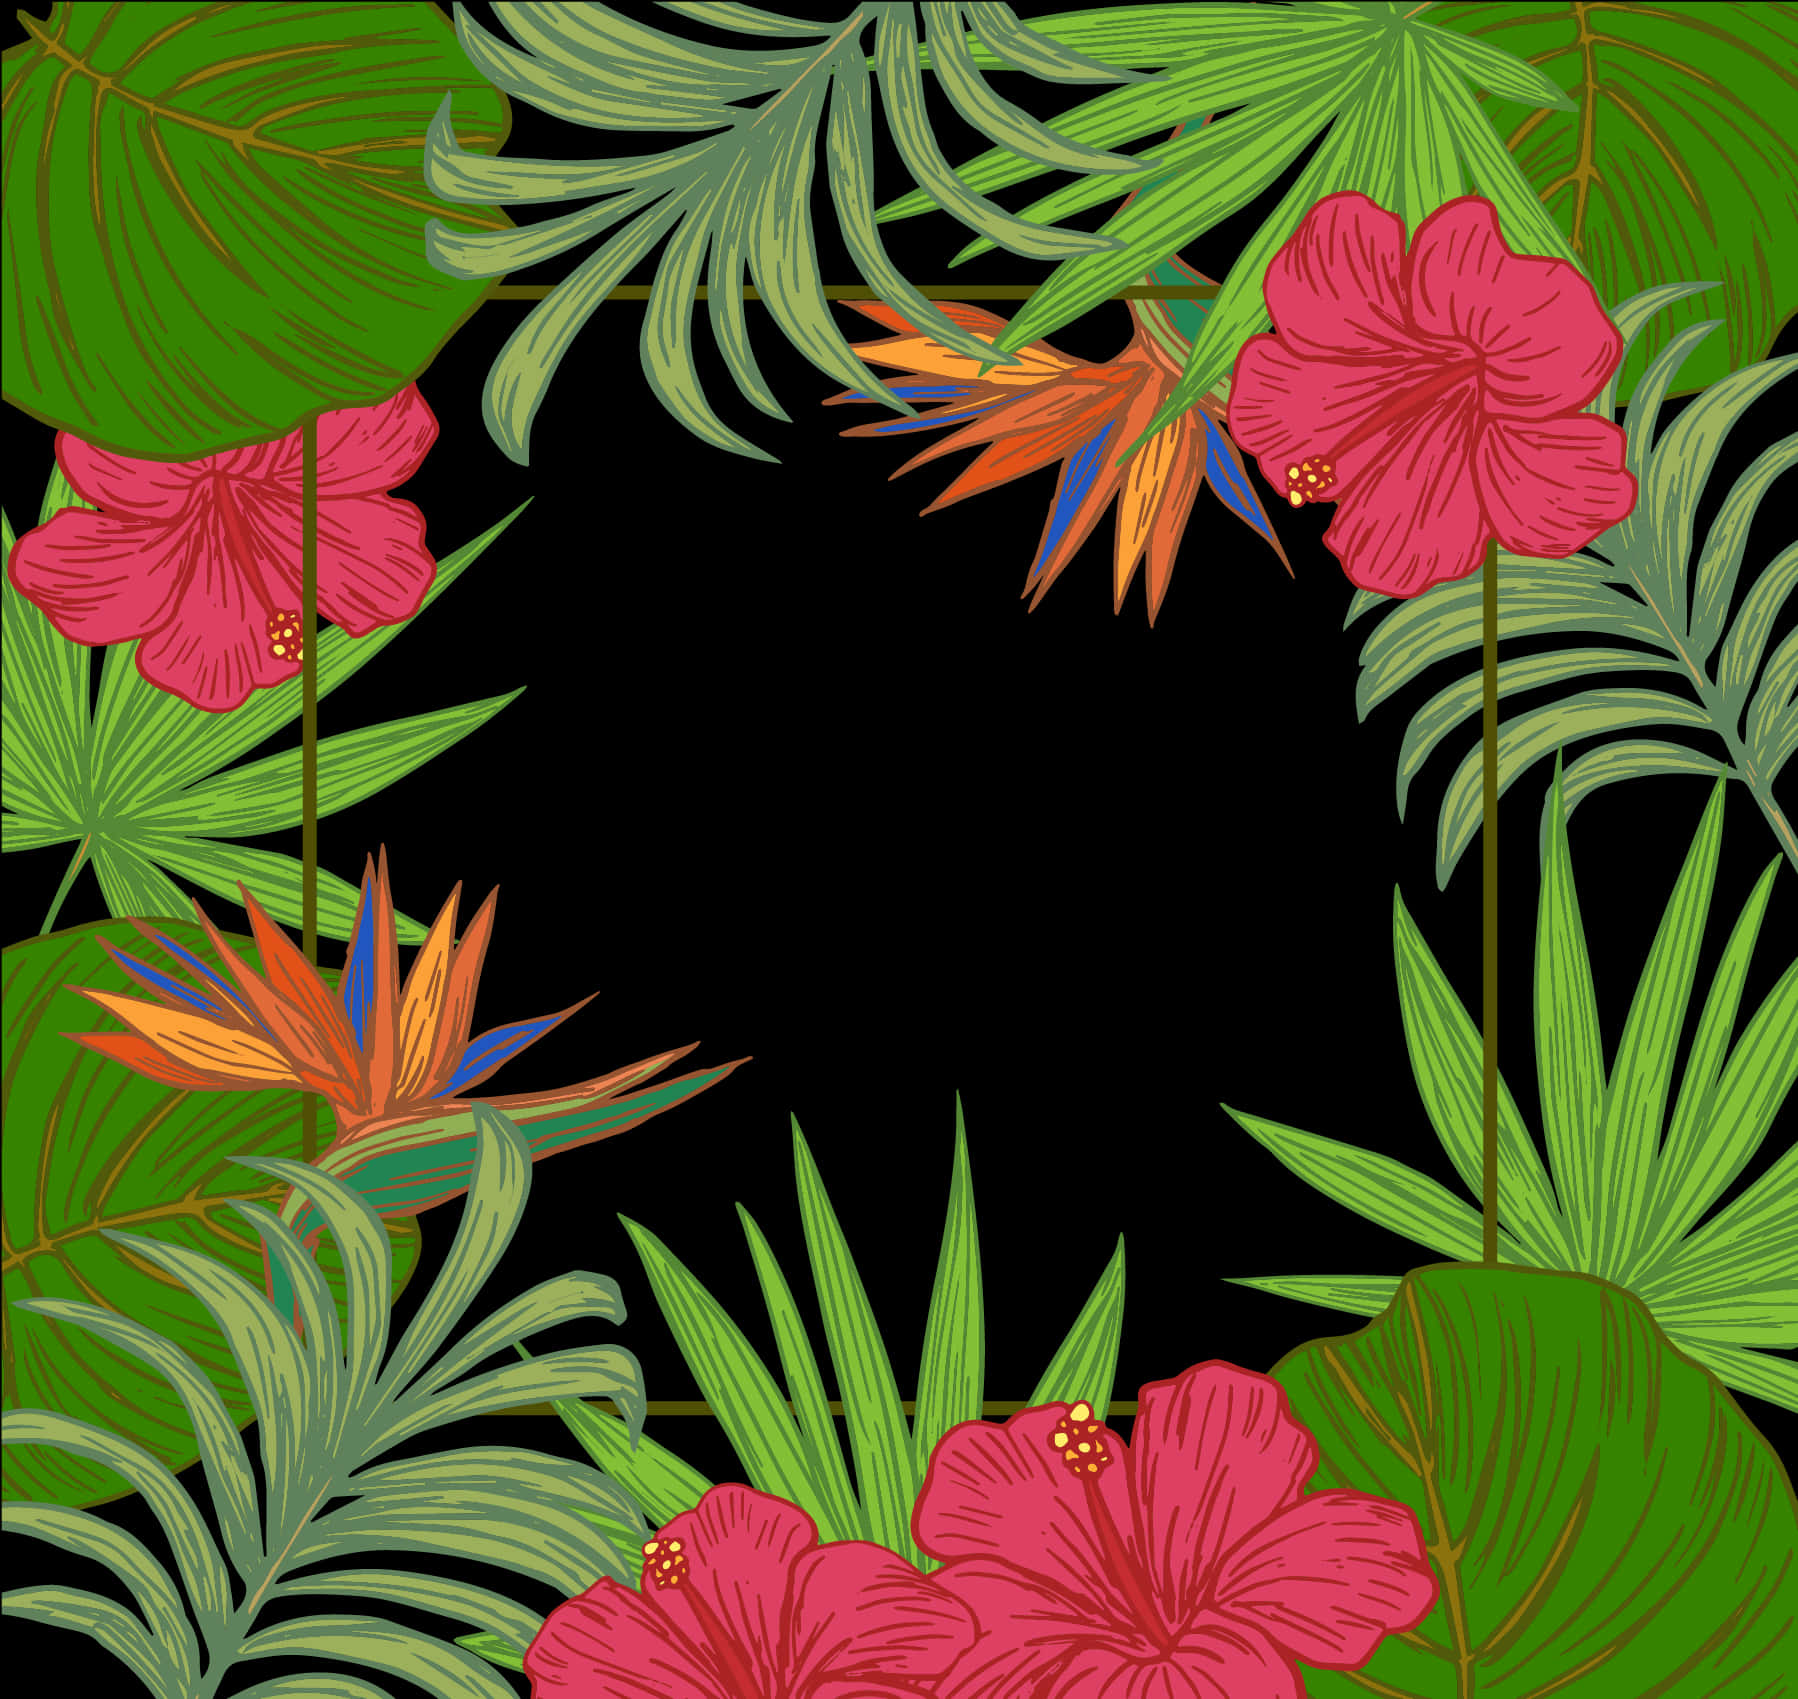 A Frame Of Tropical Leaves And Flowers